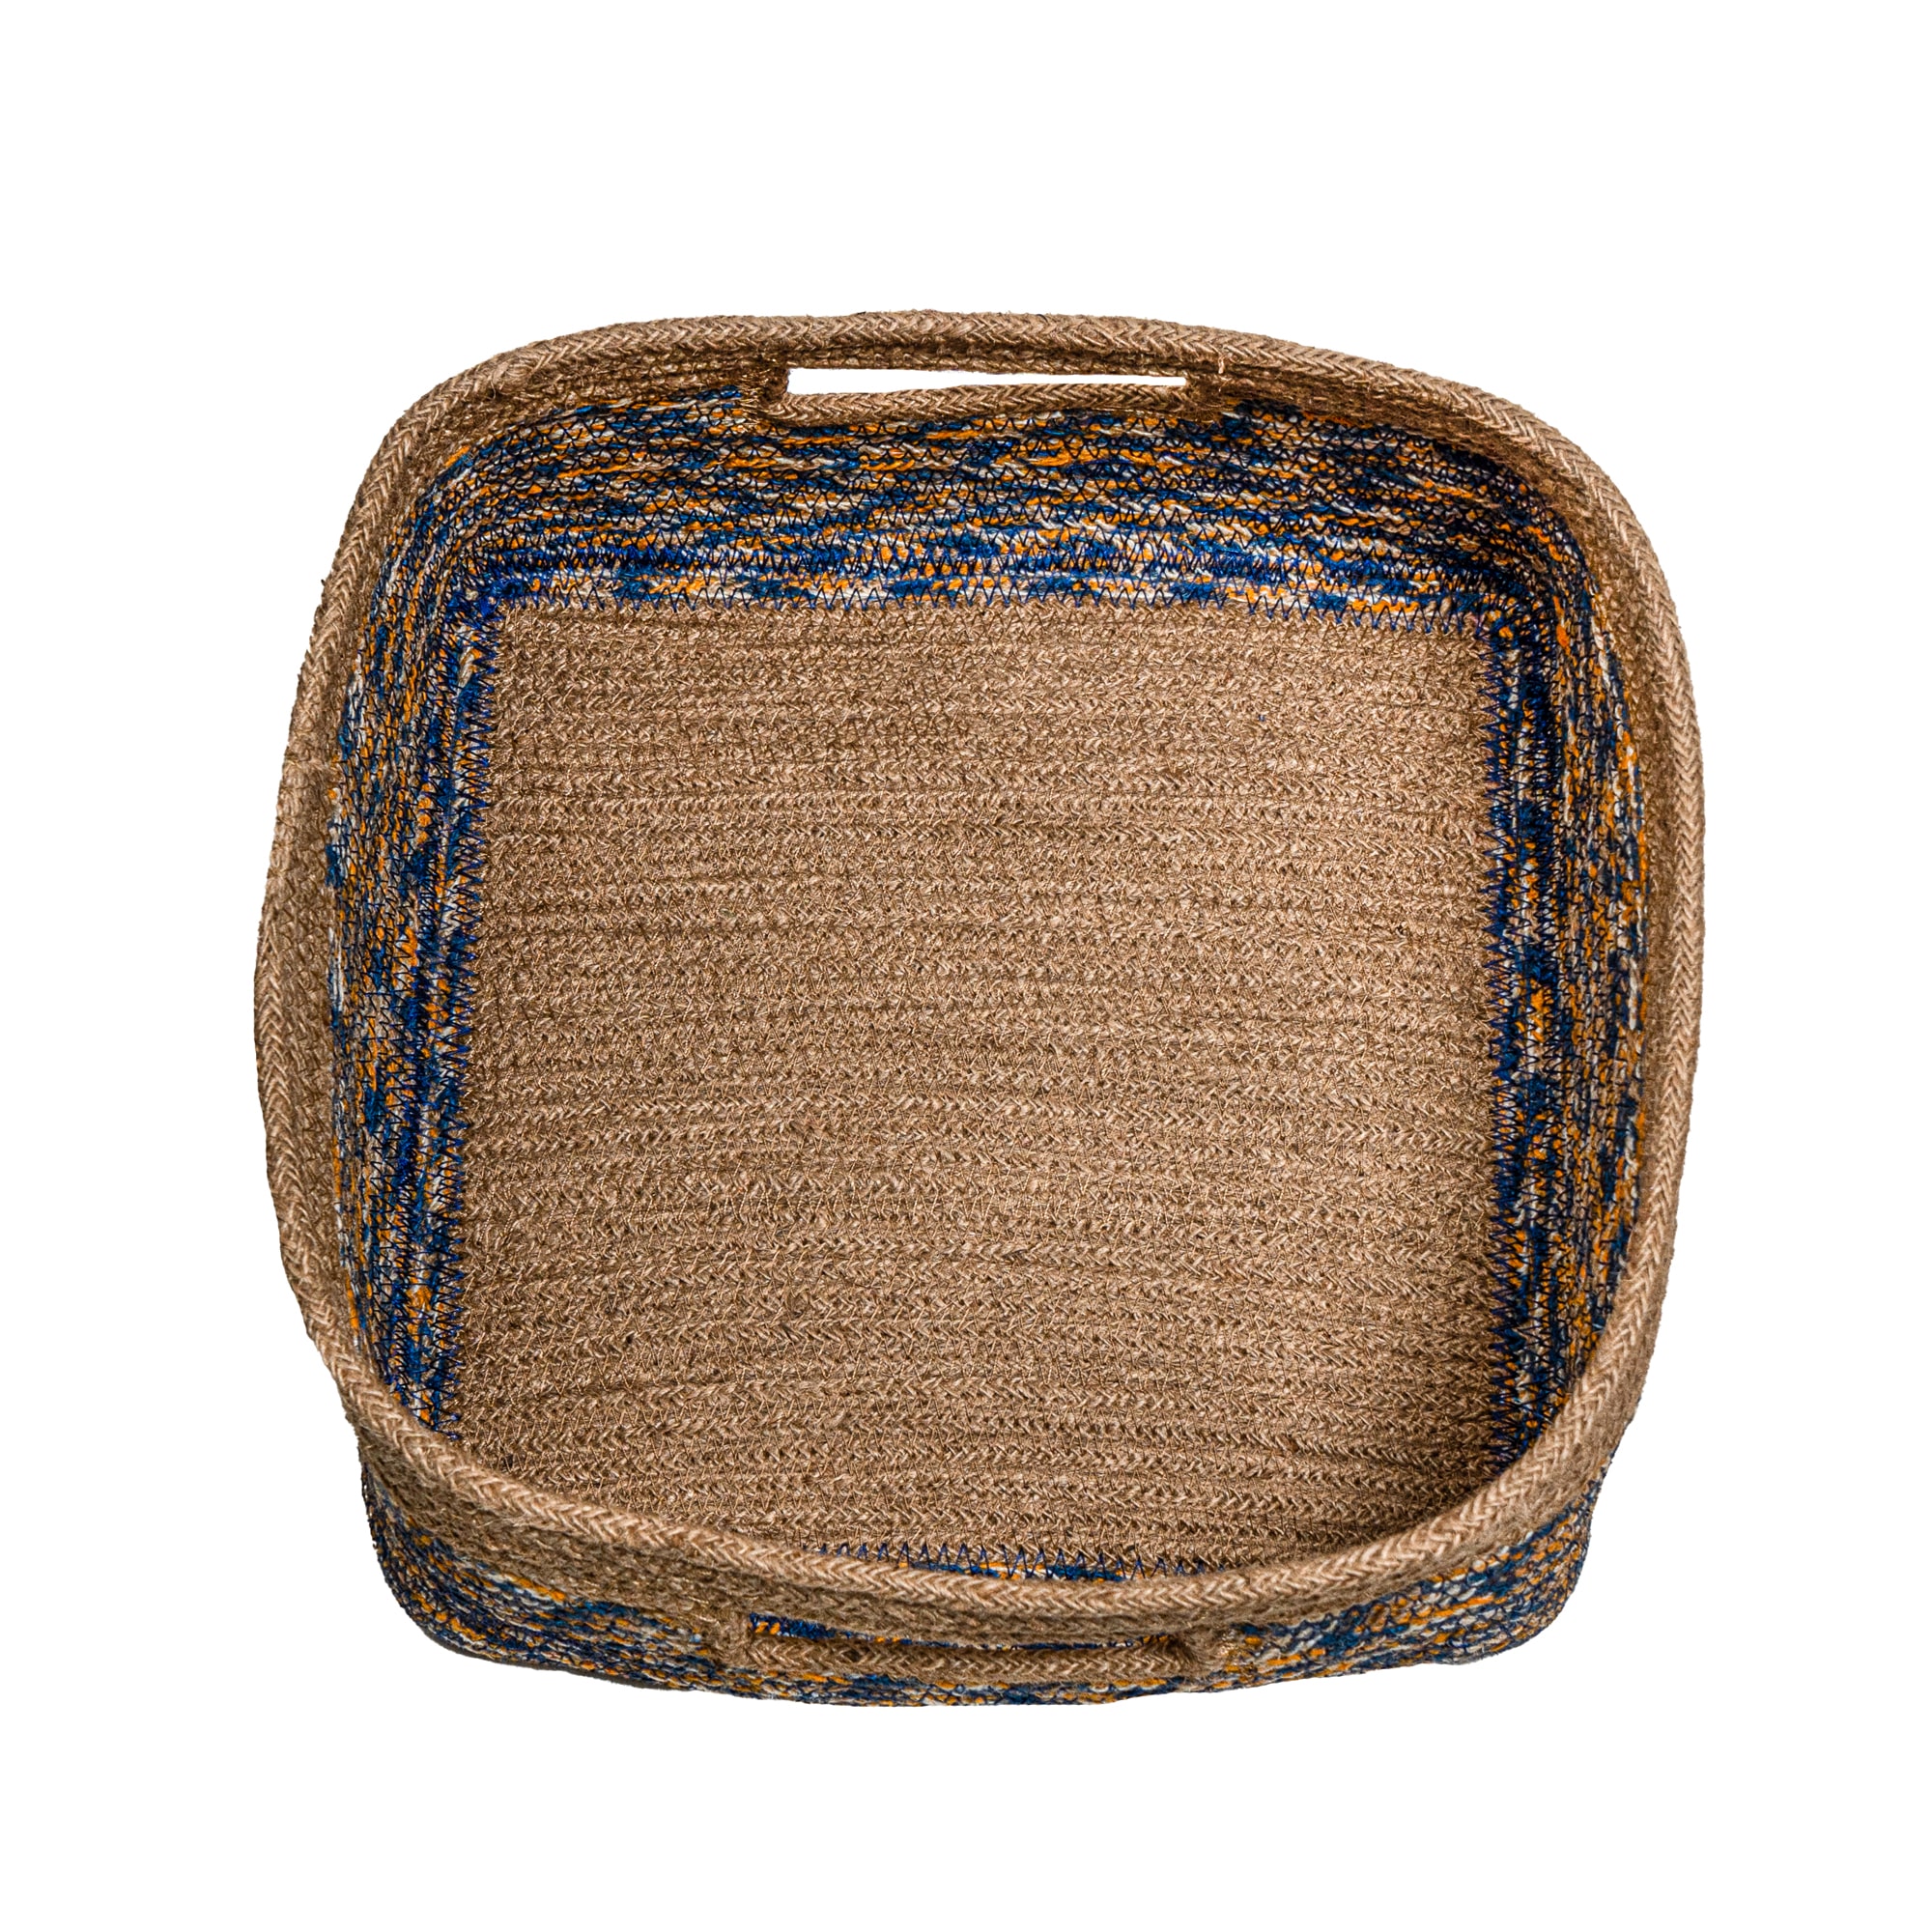 Multi-colored Jute Basket With Built-in Handles ICJMB56 (3)